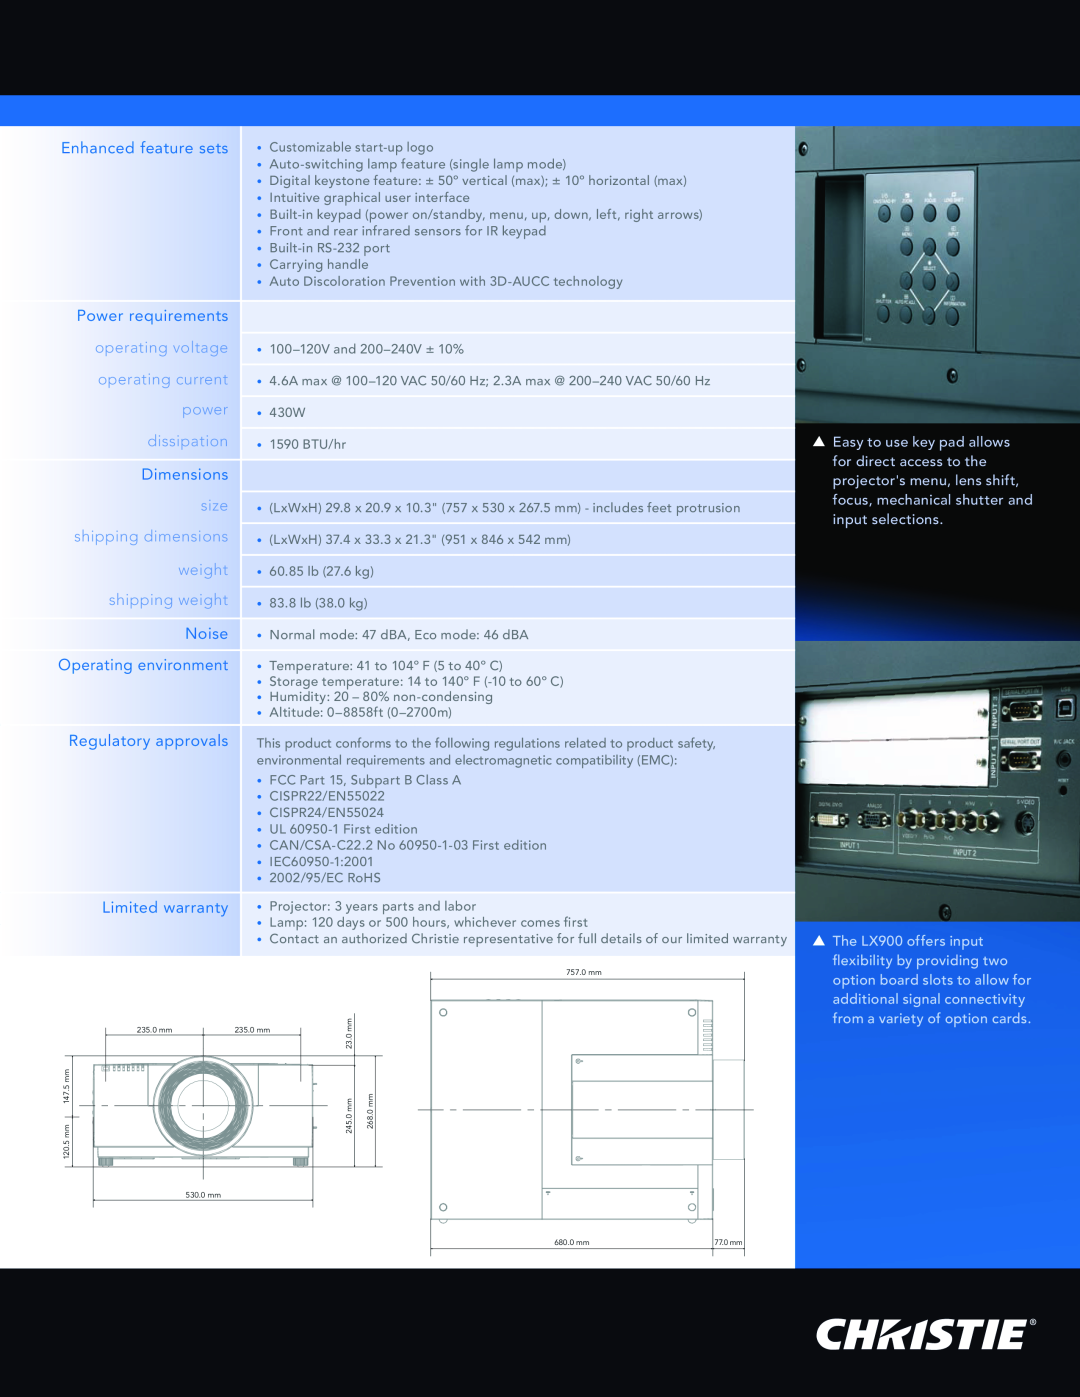 Christie Digital Systems LX900 Enhanced feature sets, Power requirements, Dimensions, Noise, Operating environment, power 